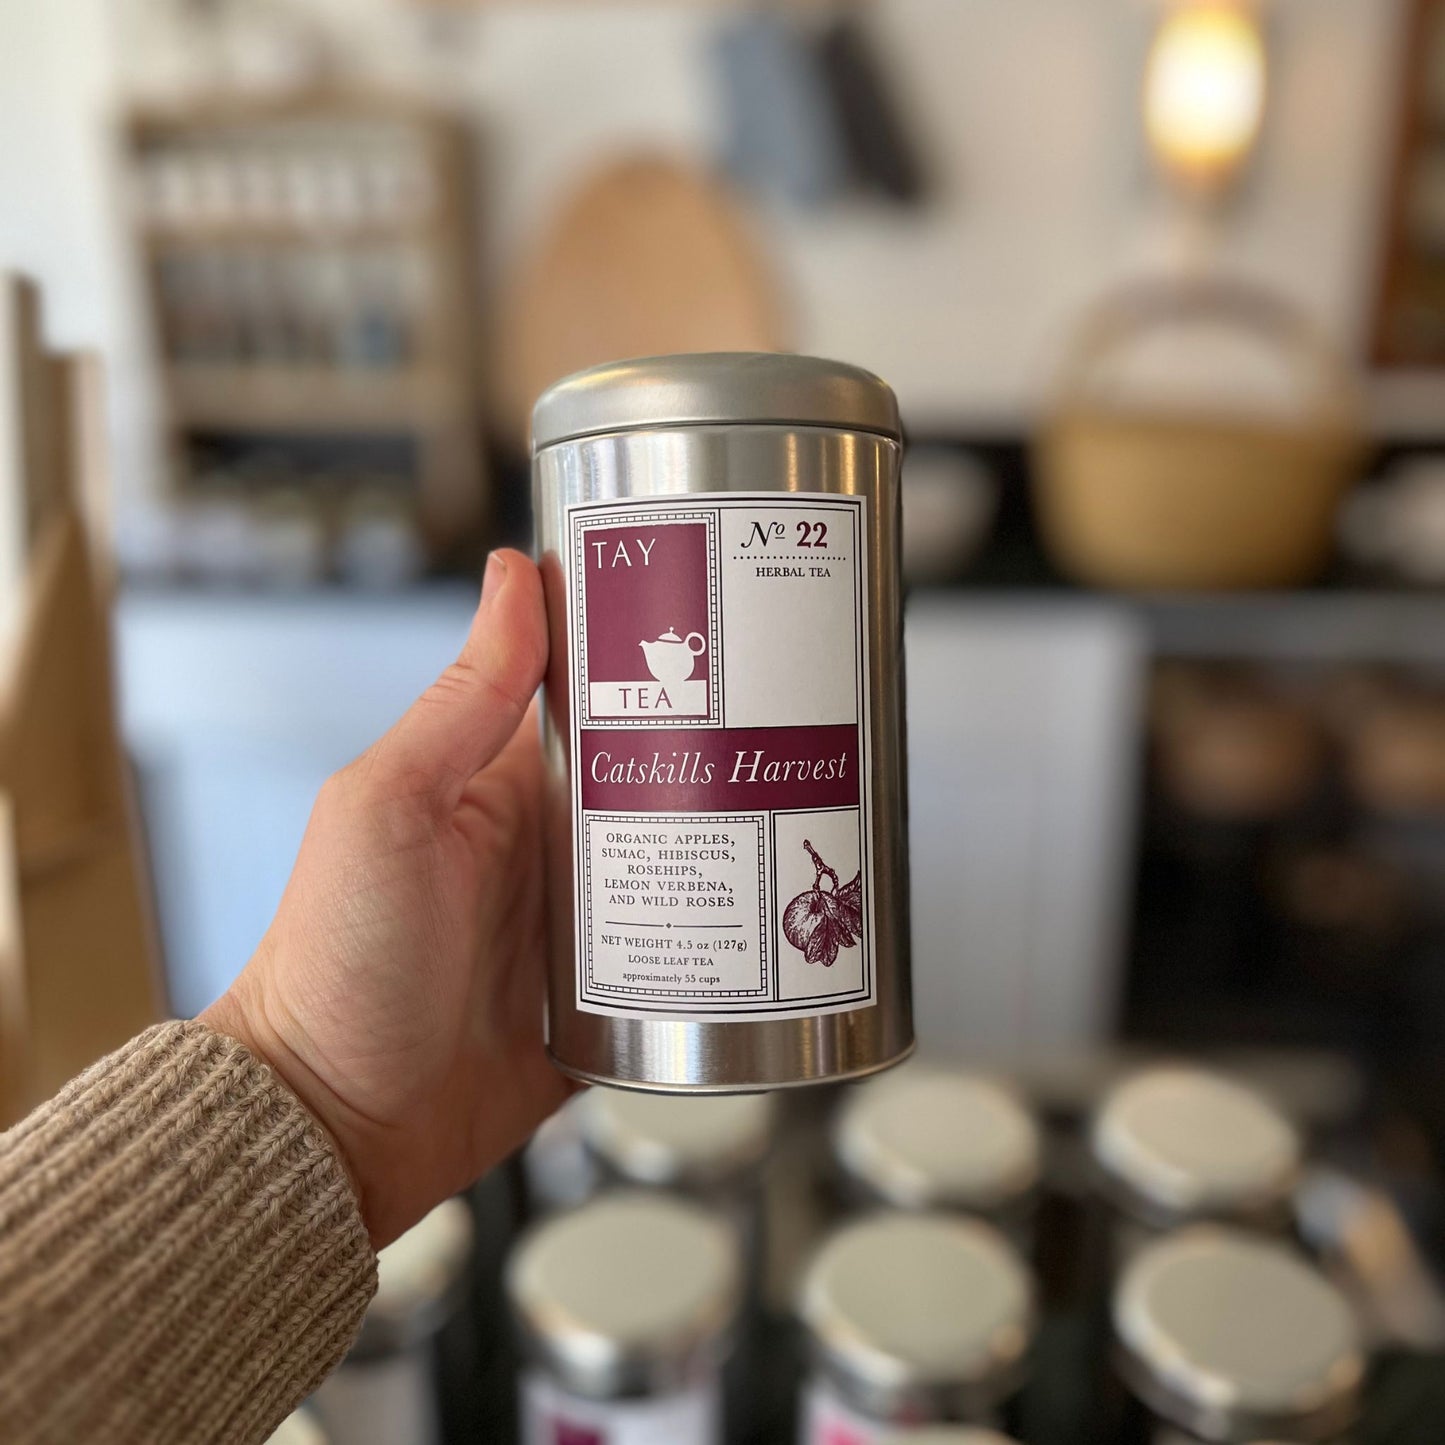 Catskills Harvest Wellness Tea from Tay Tea is an organic caffeine-free herbal blend, inspired by the bounty of the Catskill Mountains, consists of apple, sumac, rosehips, hibiscus, lemon verbena, and wild roses. 4 oz of loose tea is packaged in a resealable tin.